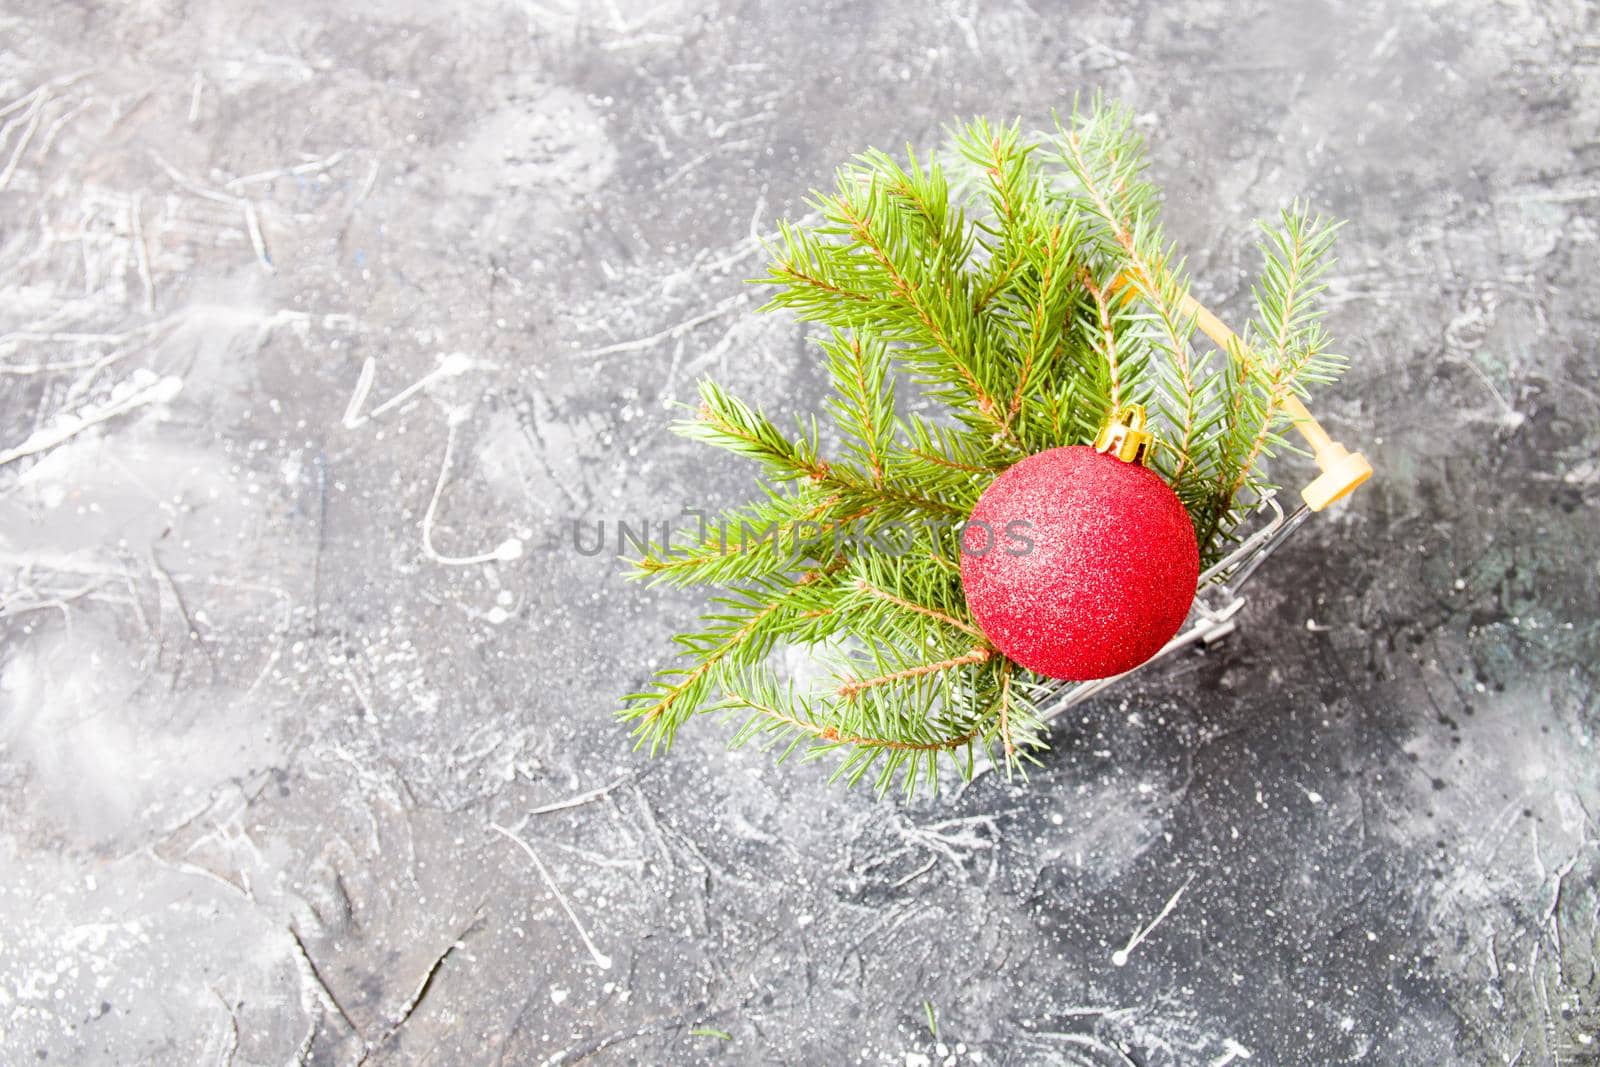 spruce green branch and red shiny Christmas-tree toy ball in a miniature shopping trolley on a black background, copy space by natashko